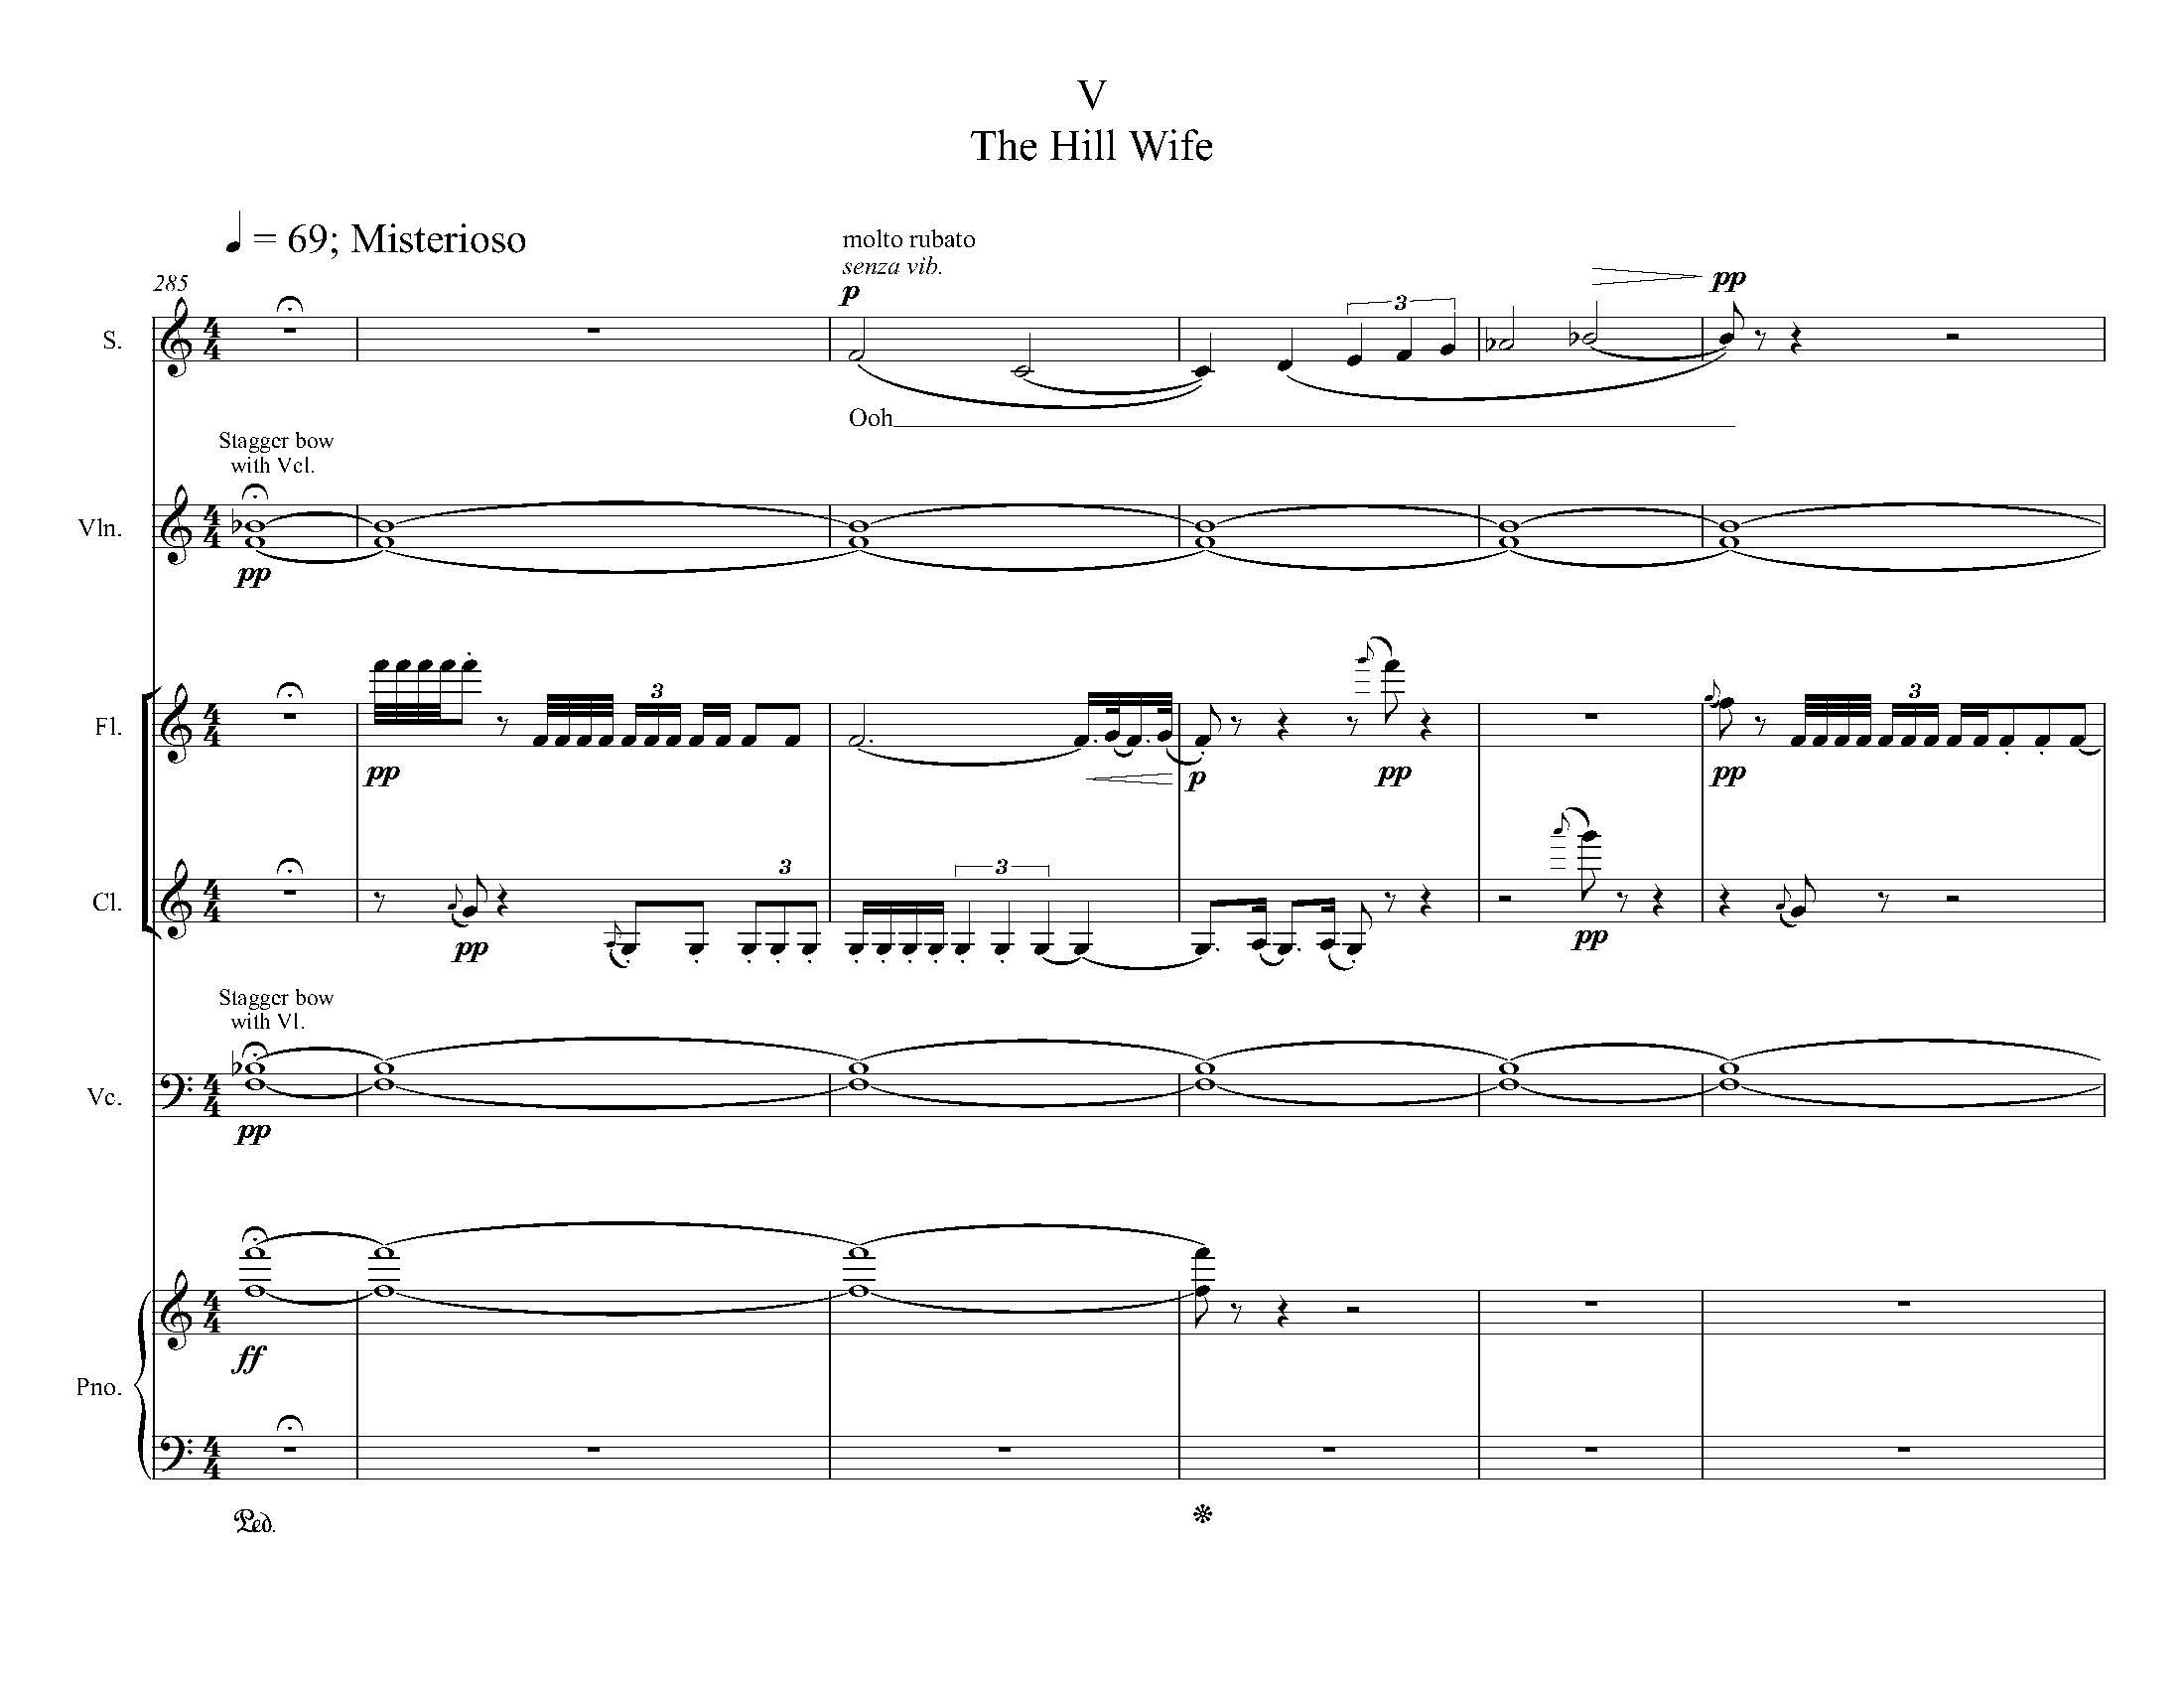 The Hill Wife - Complete Score_Page_077.jpg